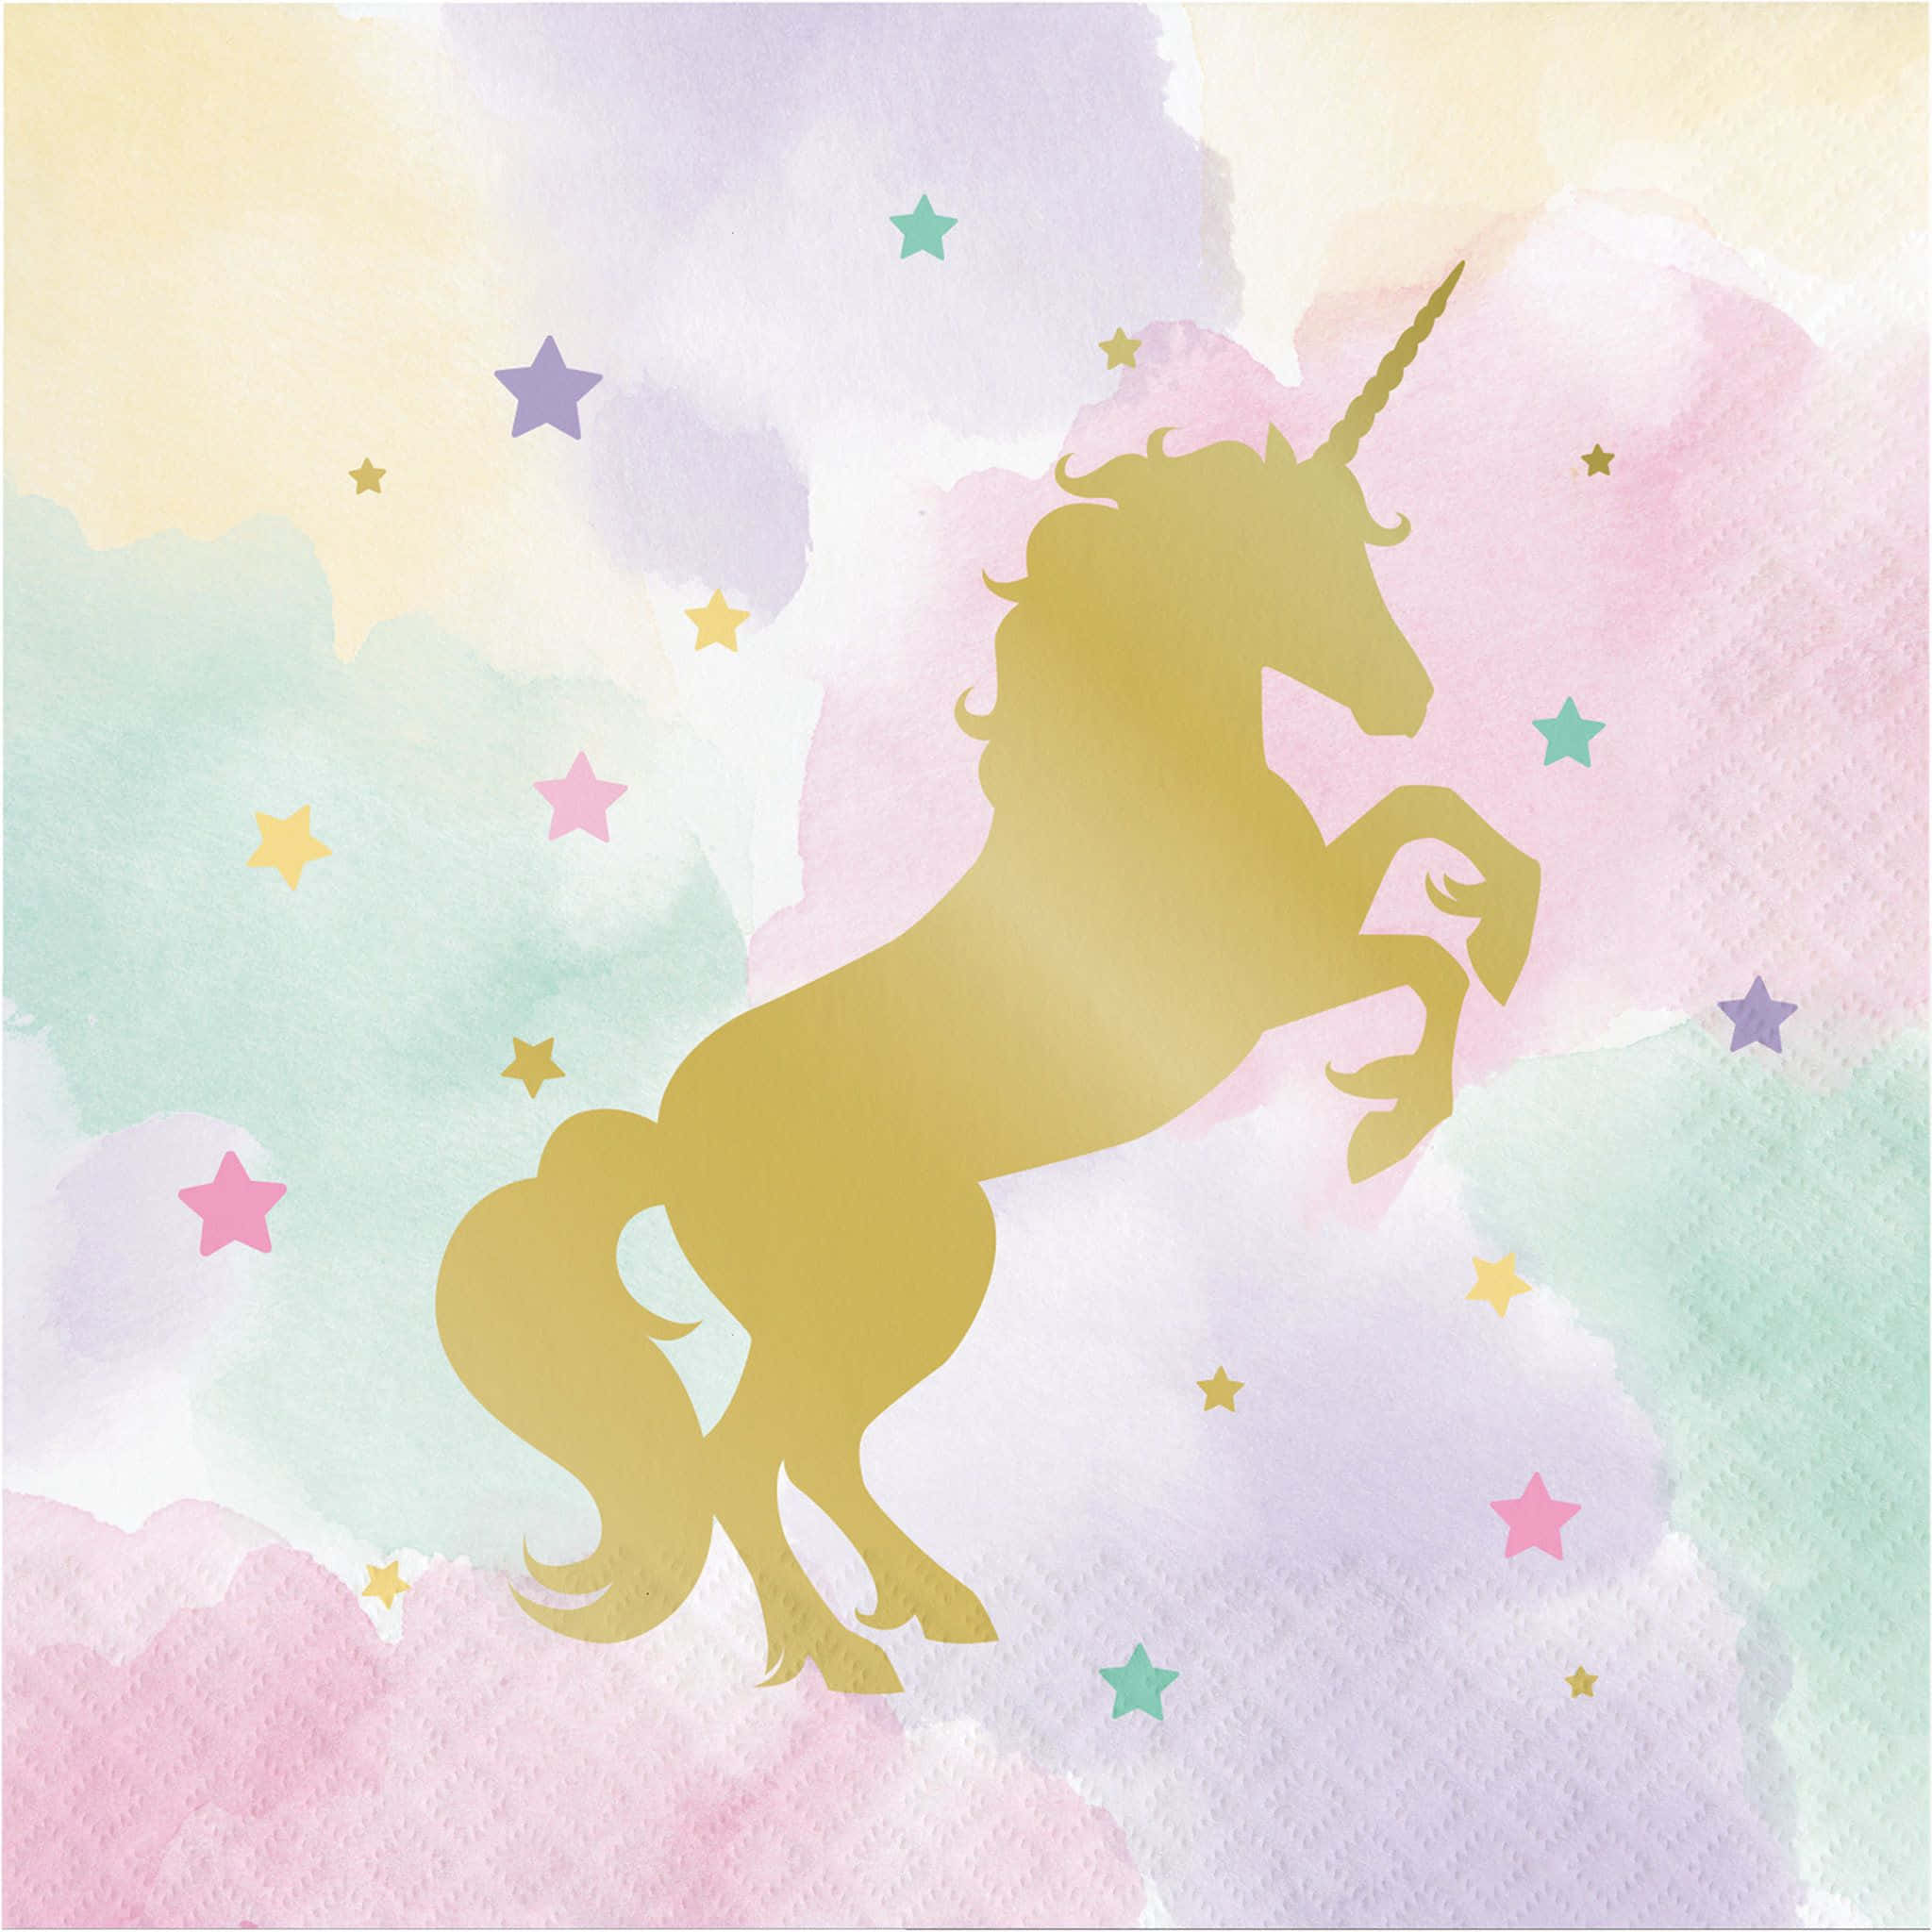 Let your imagination run wild with this Pastel Unicorn background.